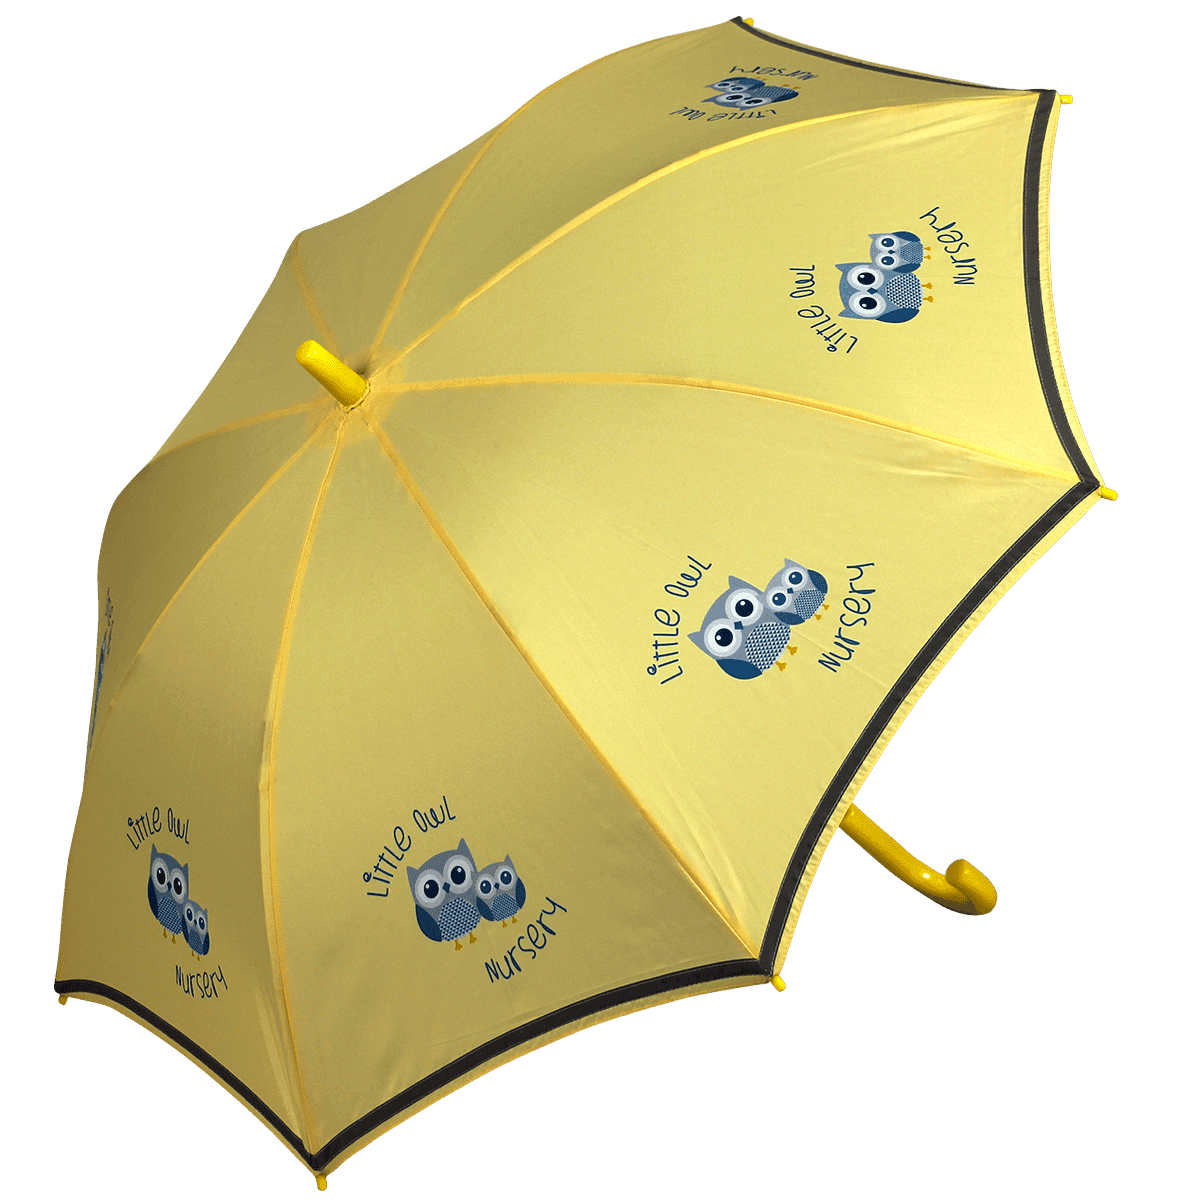 Krazy Kids Umbrella Soft Feel - Promotions Only Group Limited